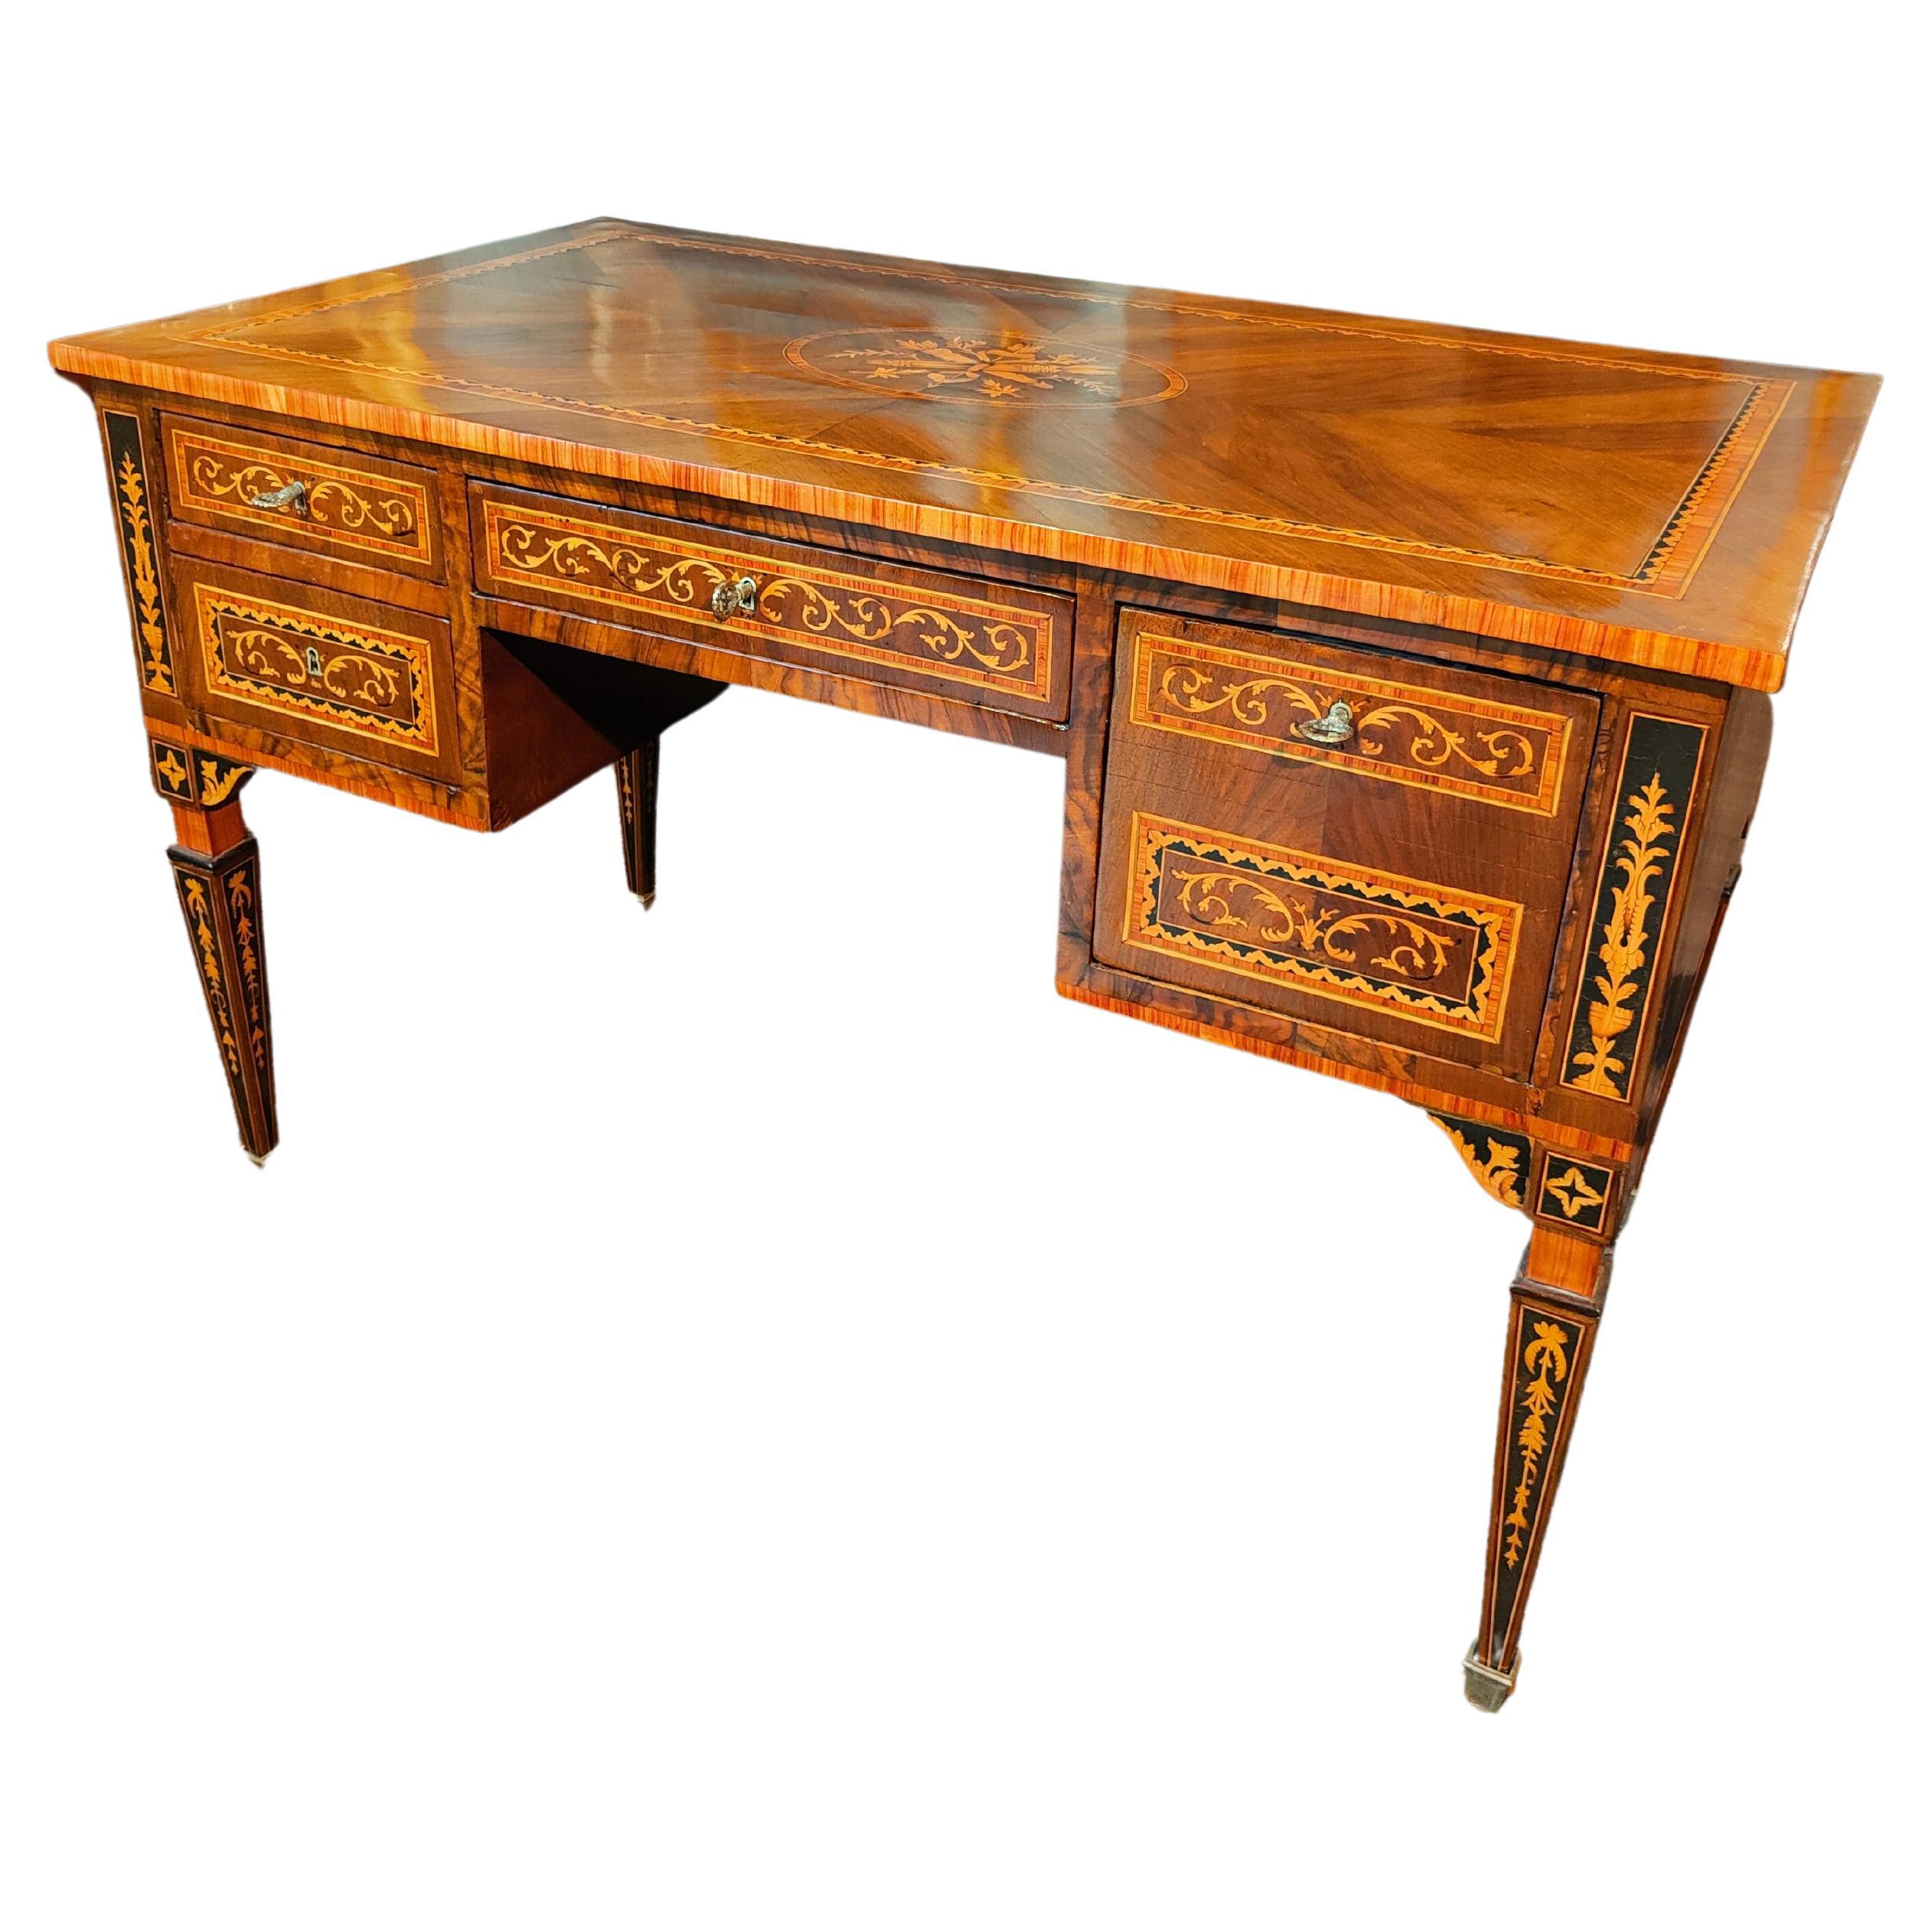 Rare Lombard Desk from the 18th Century For Sale